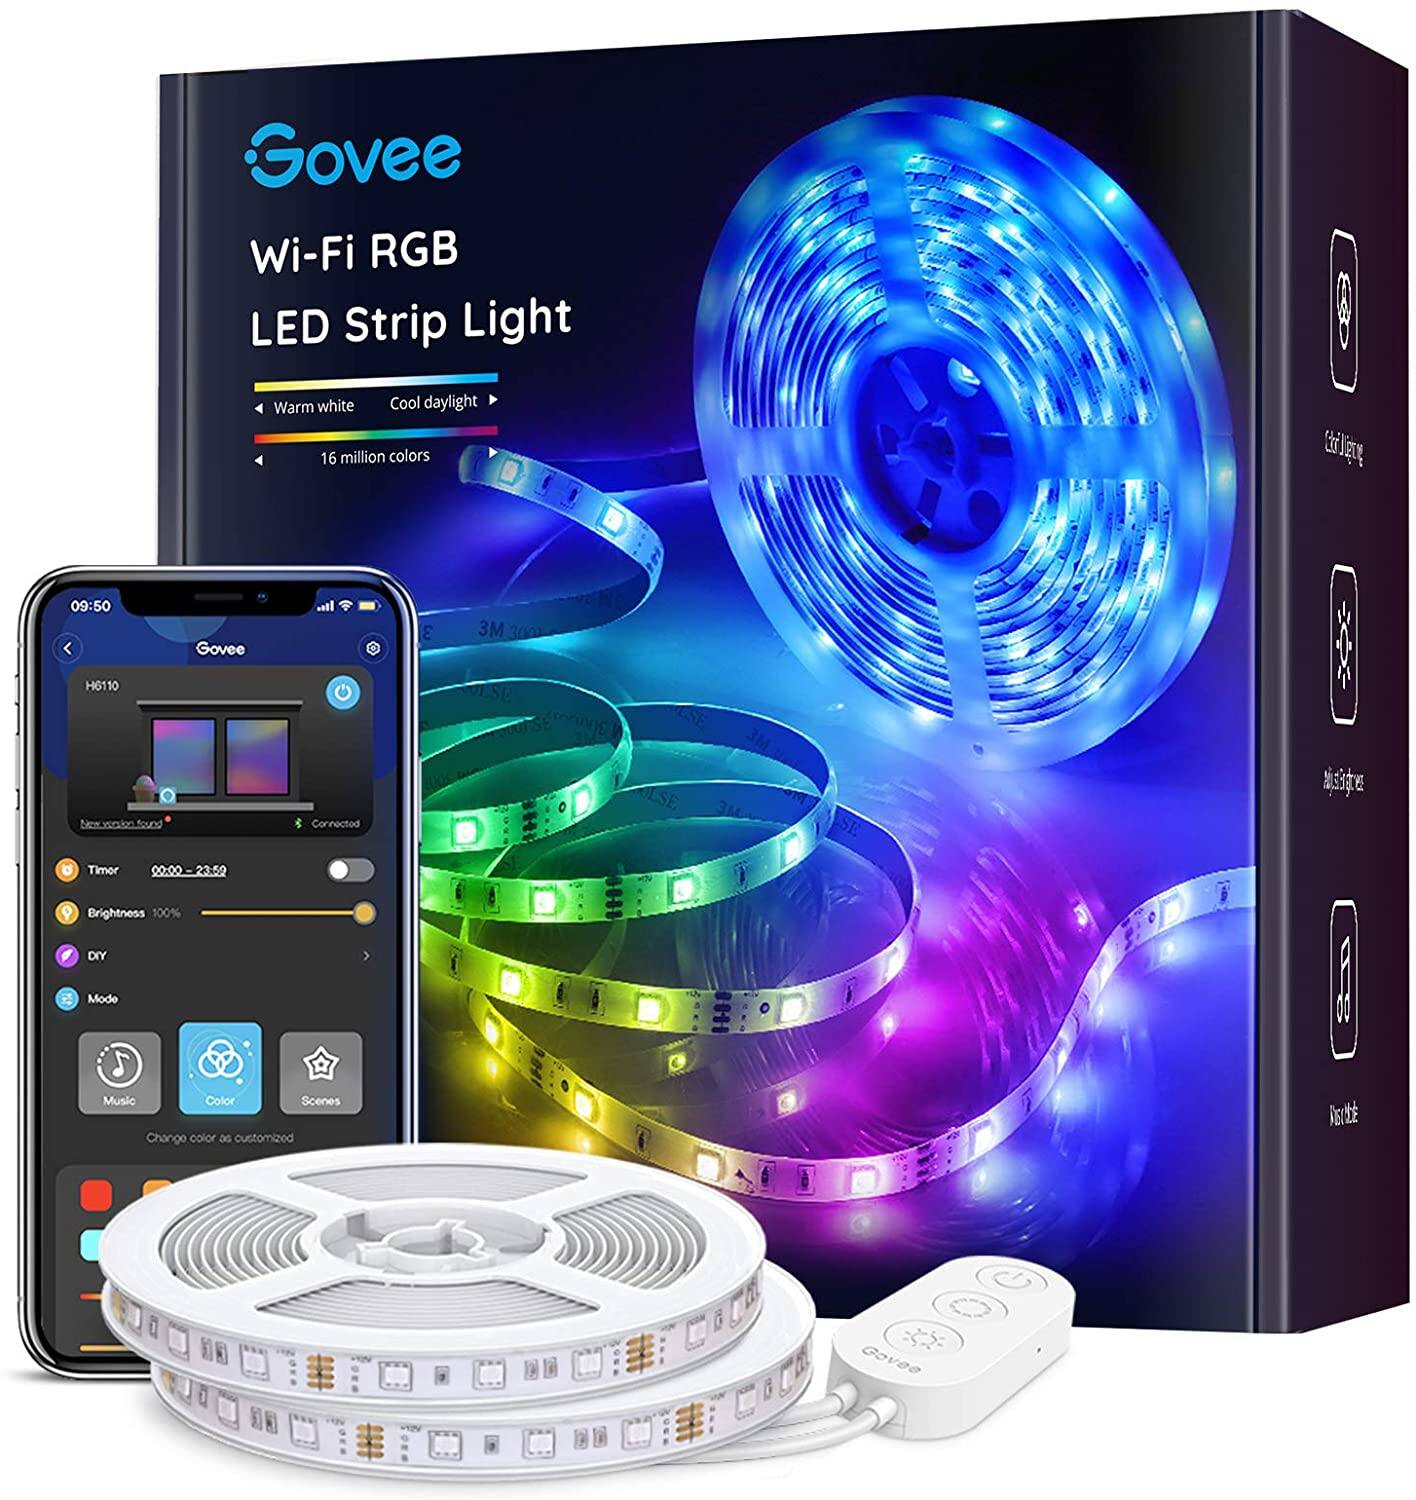 Govee 32.8ft WiFi  LED Strip Lights, Work with Alexa and Google Assistant, Bright 5050 LEDs, 16 Million Colors with App Control and Music Sync-$26.39 + FS